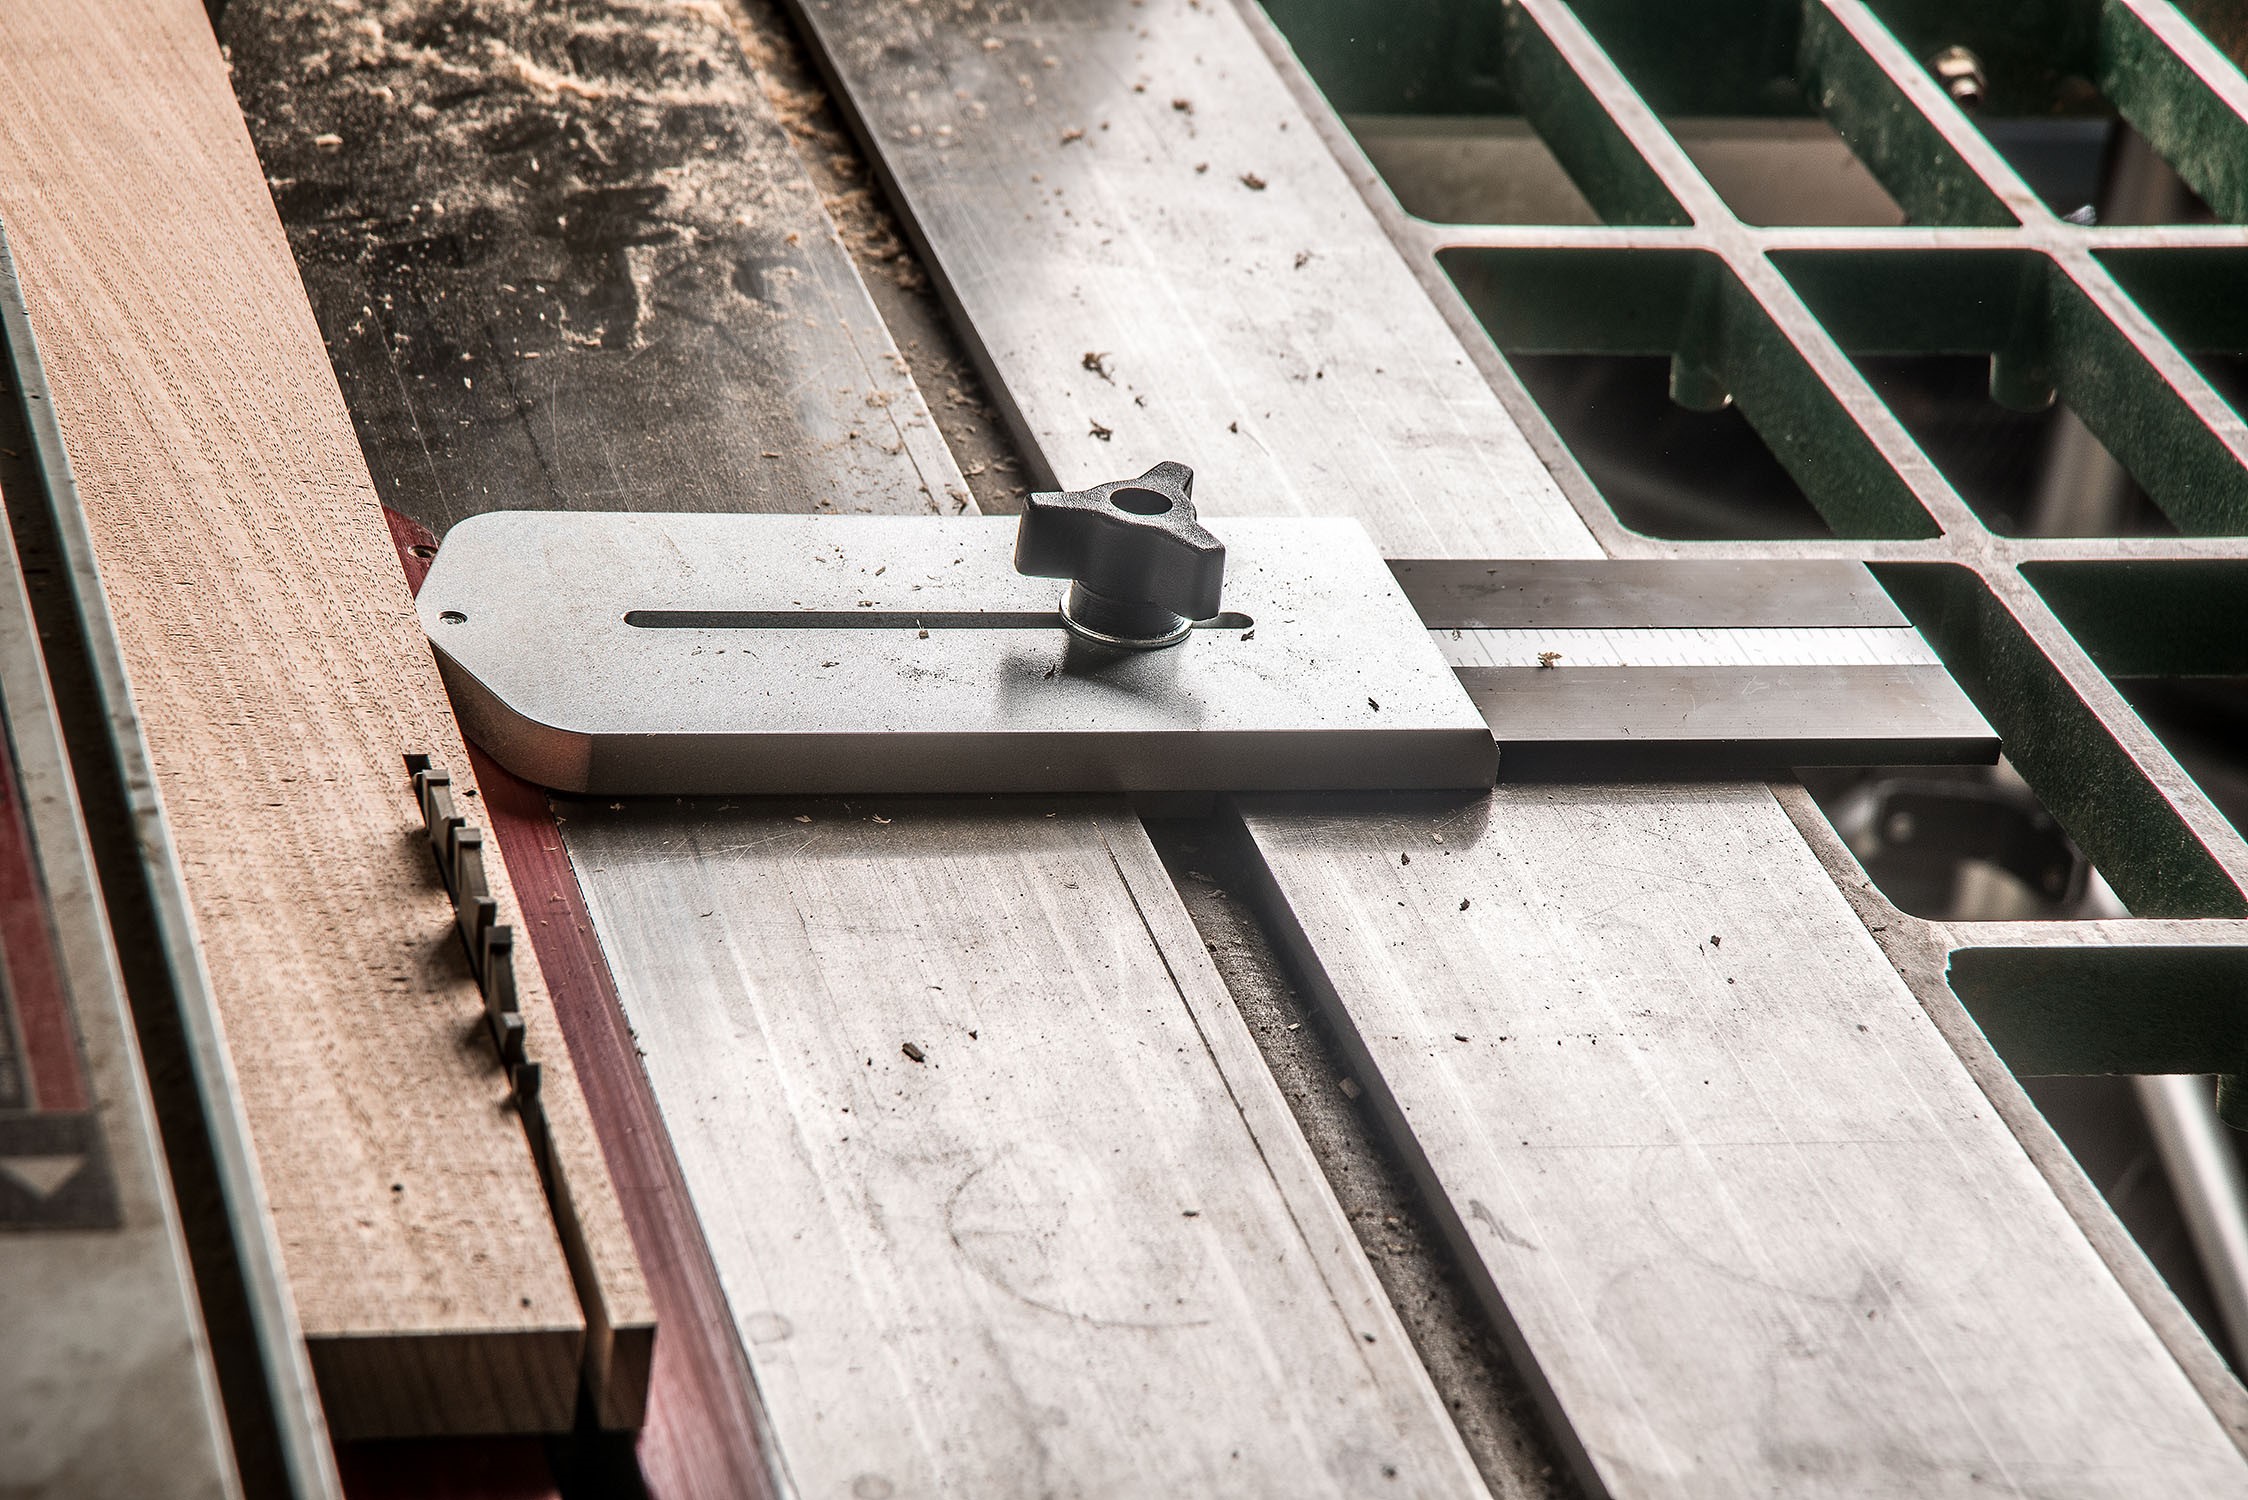 The ultimate buyer's guide to table saws